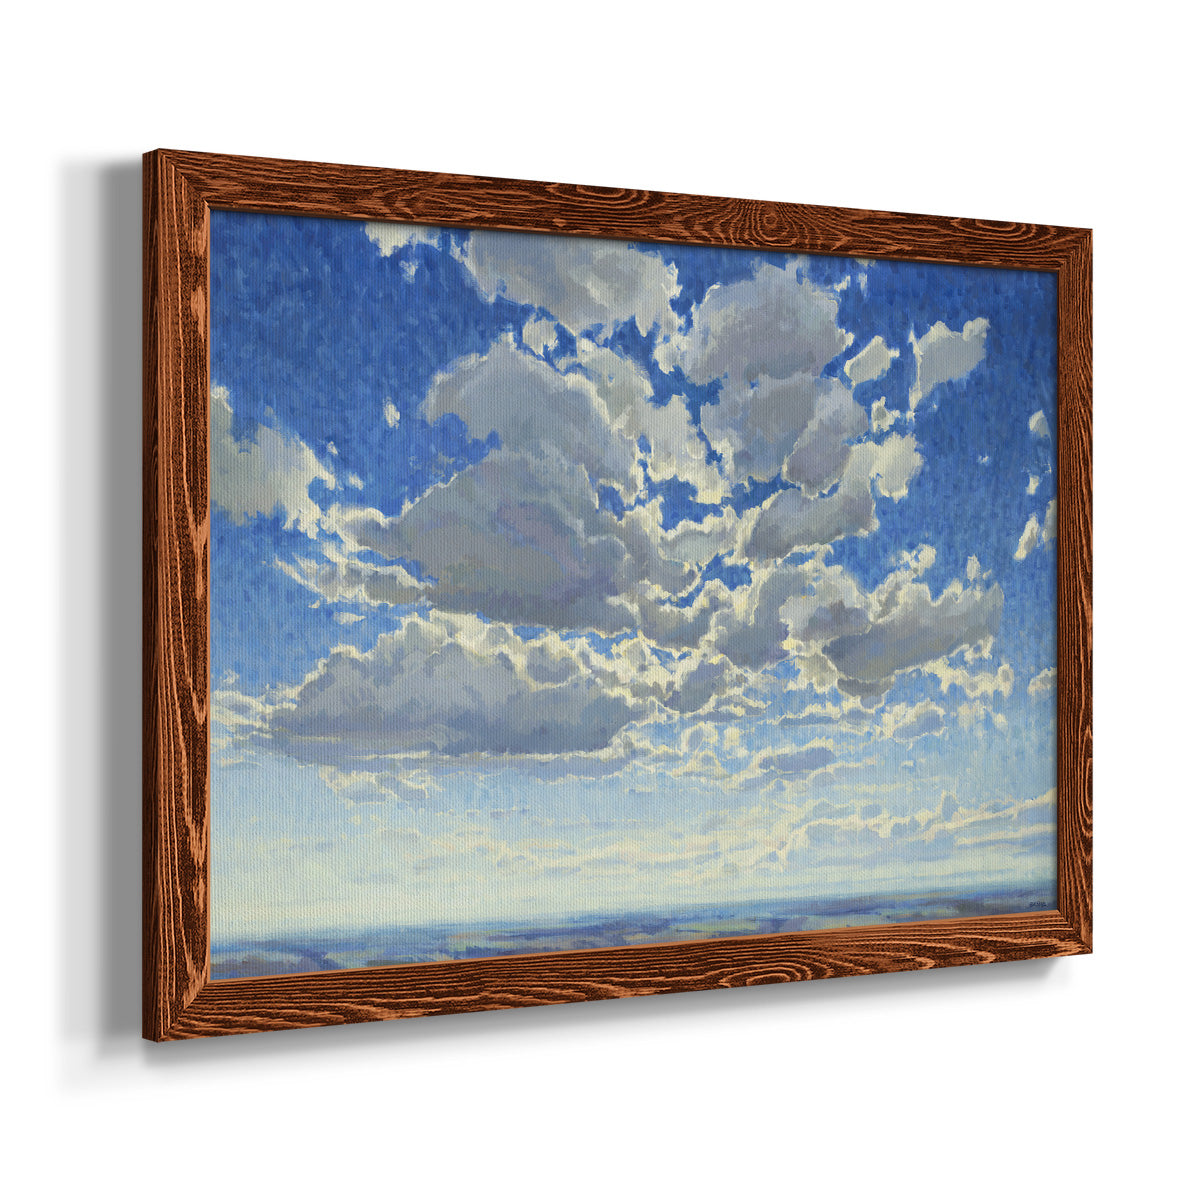 UBRM165-Premium Framed Canvas - Ready to Hang